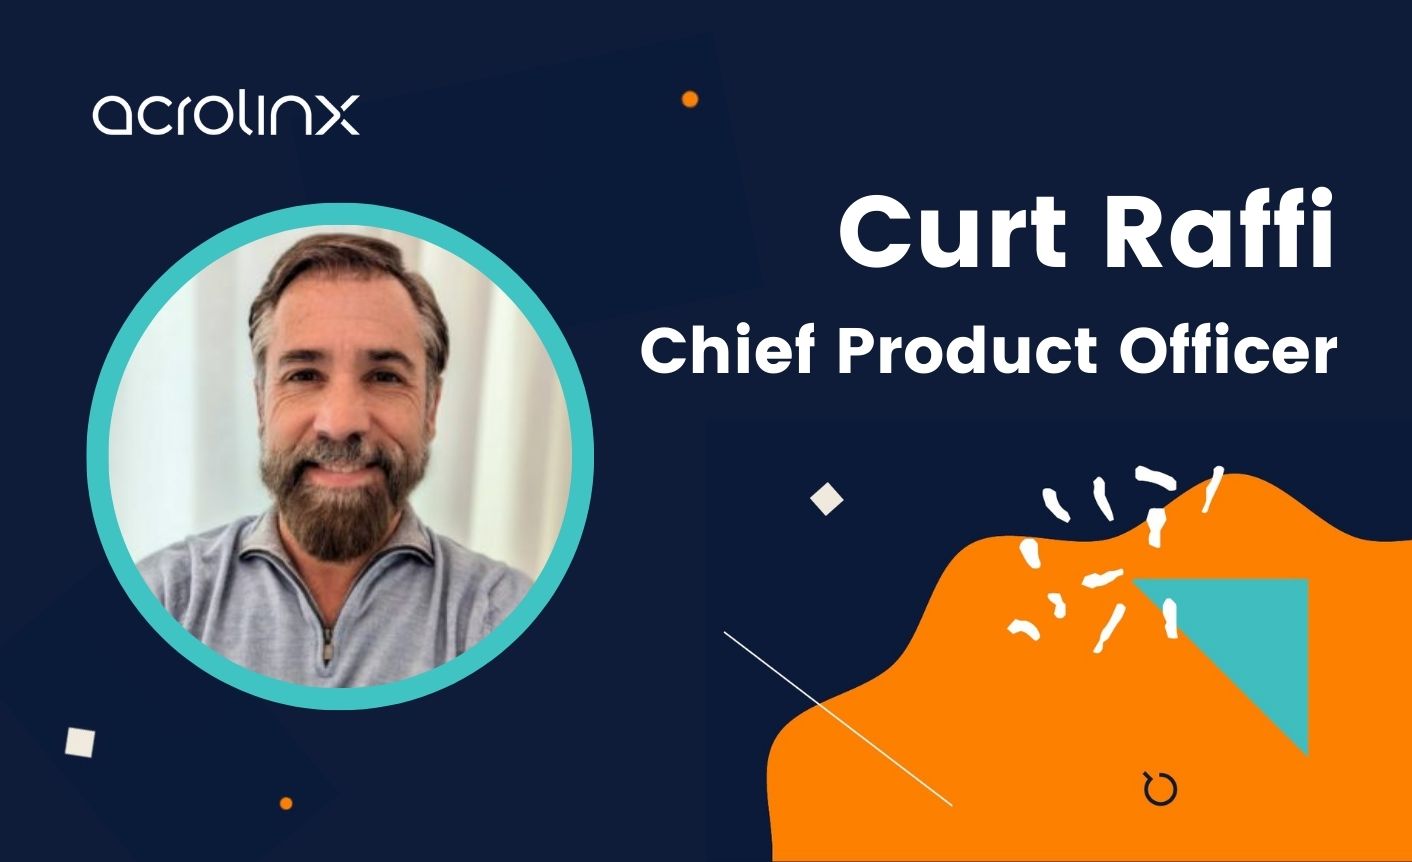 On the left is an image of Curt Raffi and on the right is Curt's name and his title of new "Chief Product Officer."